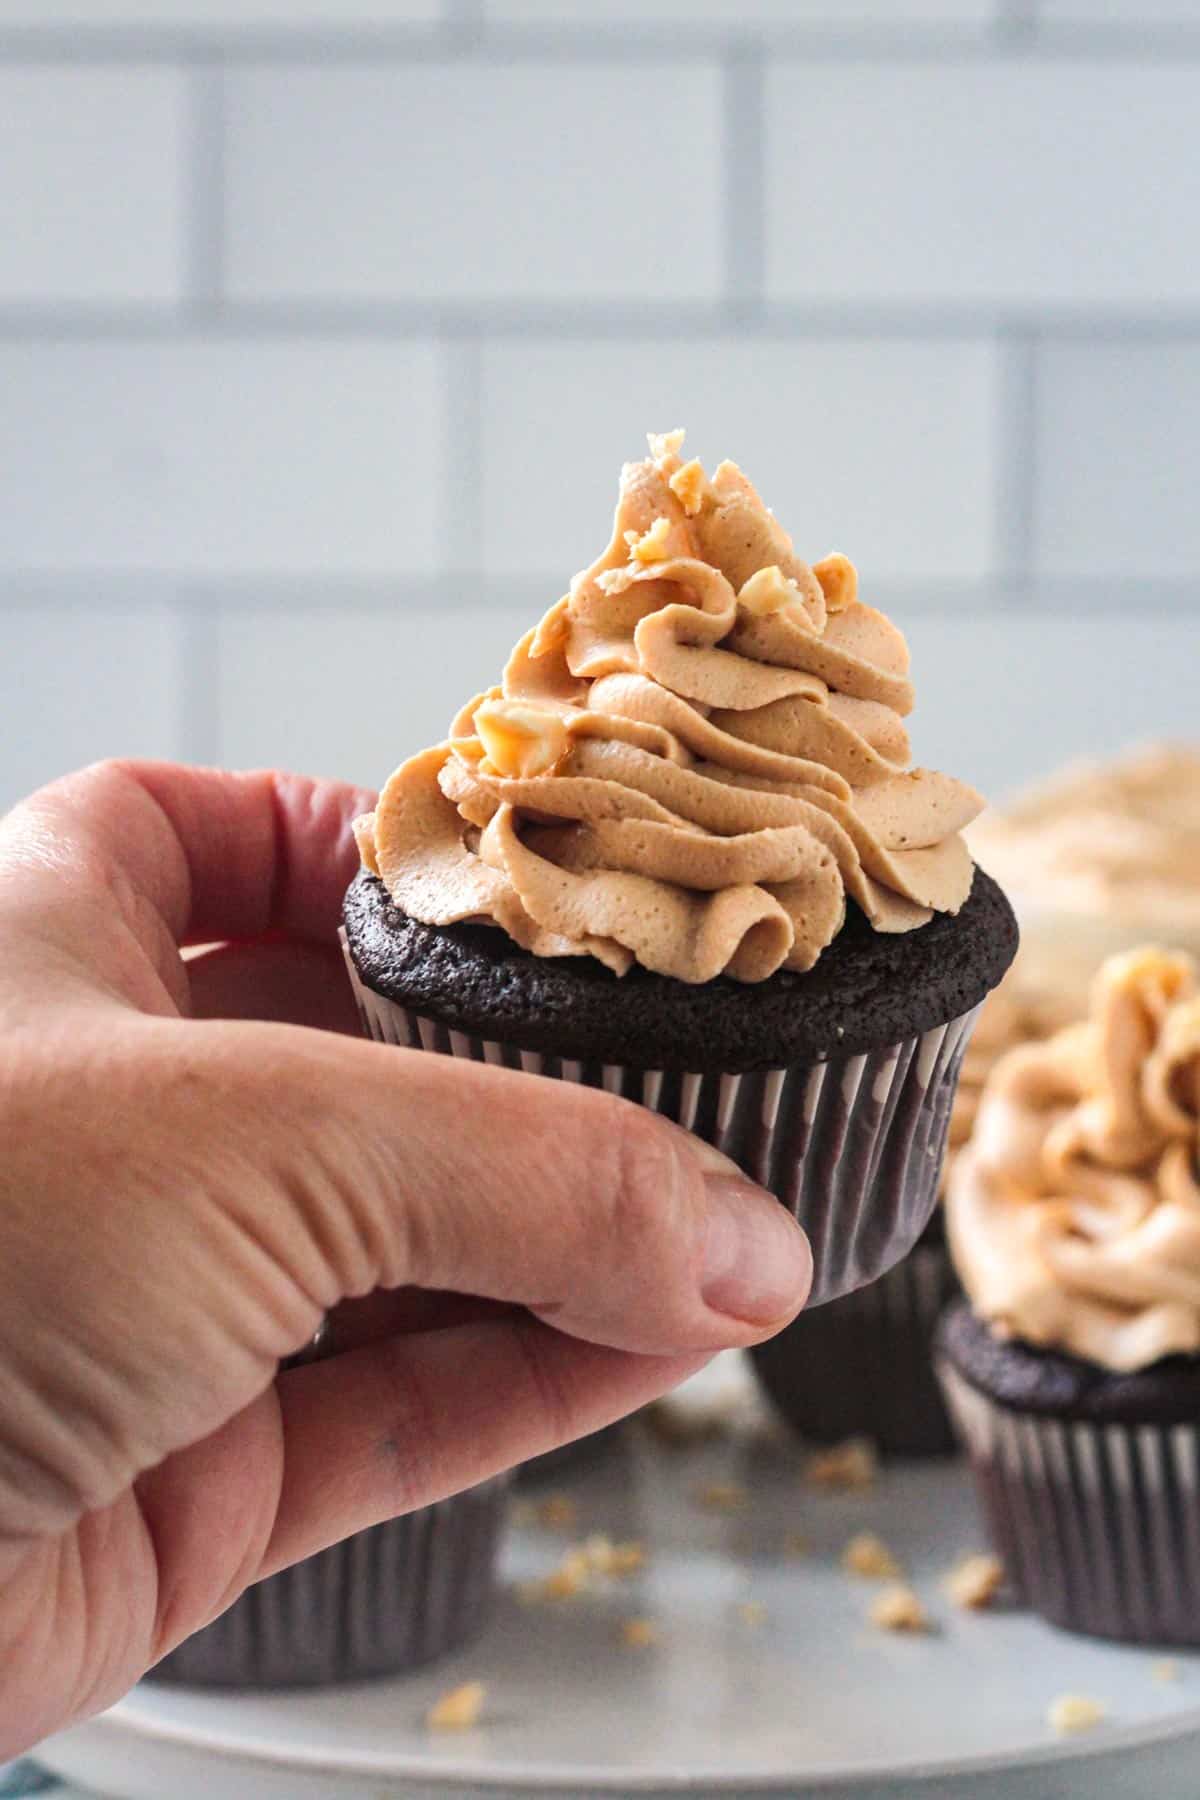 Hand holding a peanut butter frosting chocolate cupcake.